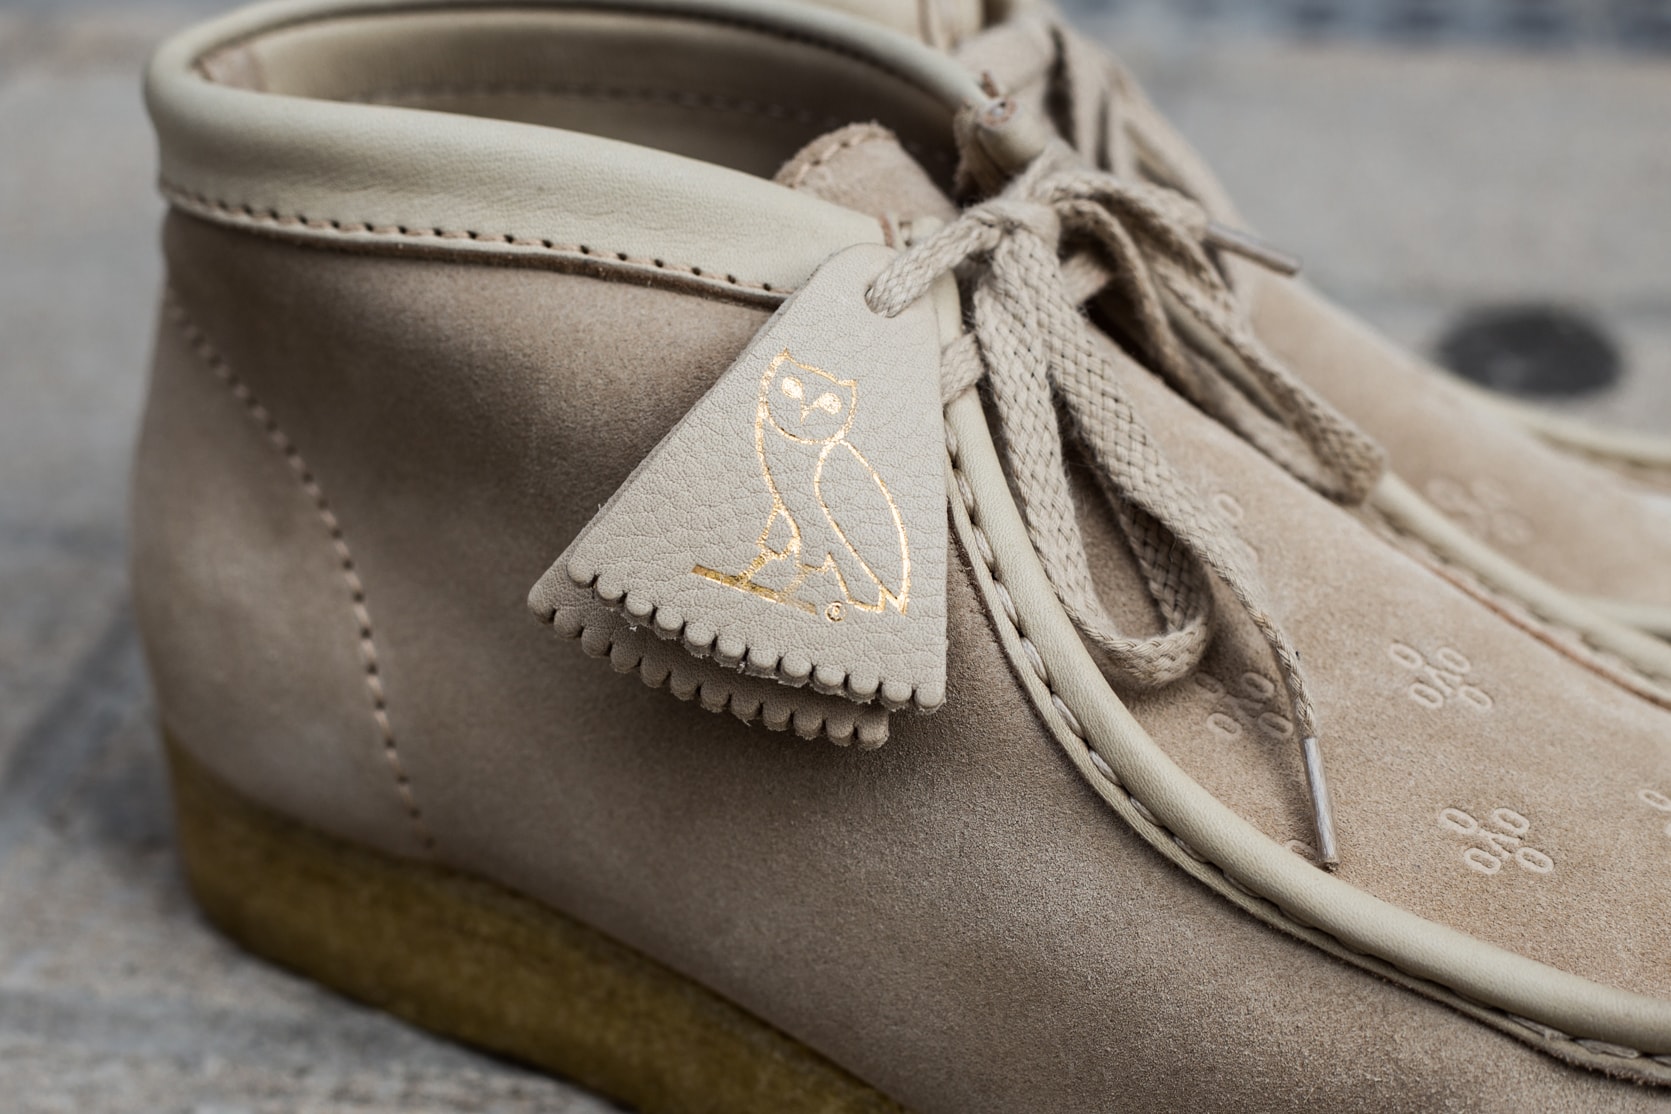 A Closer Look at Drake OVO x Clarks Wallabee | Hypebeast